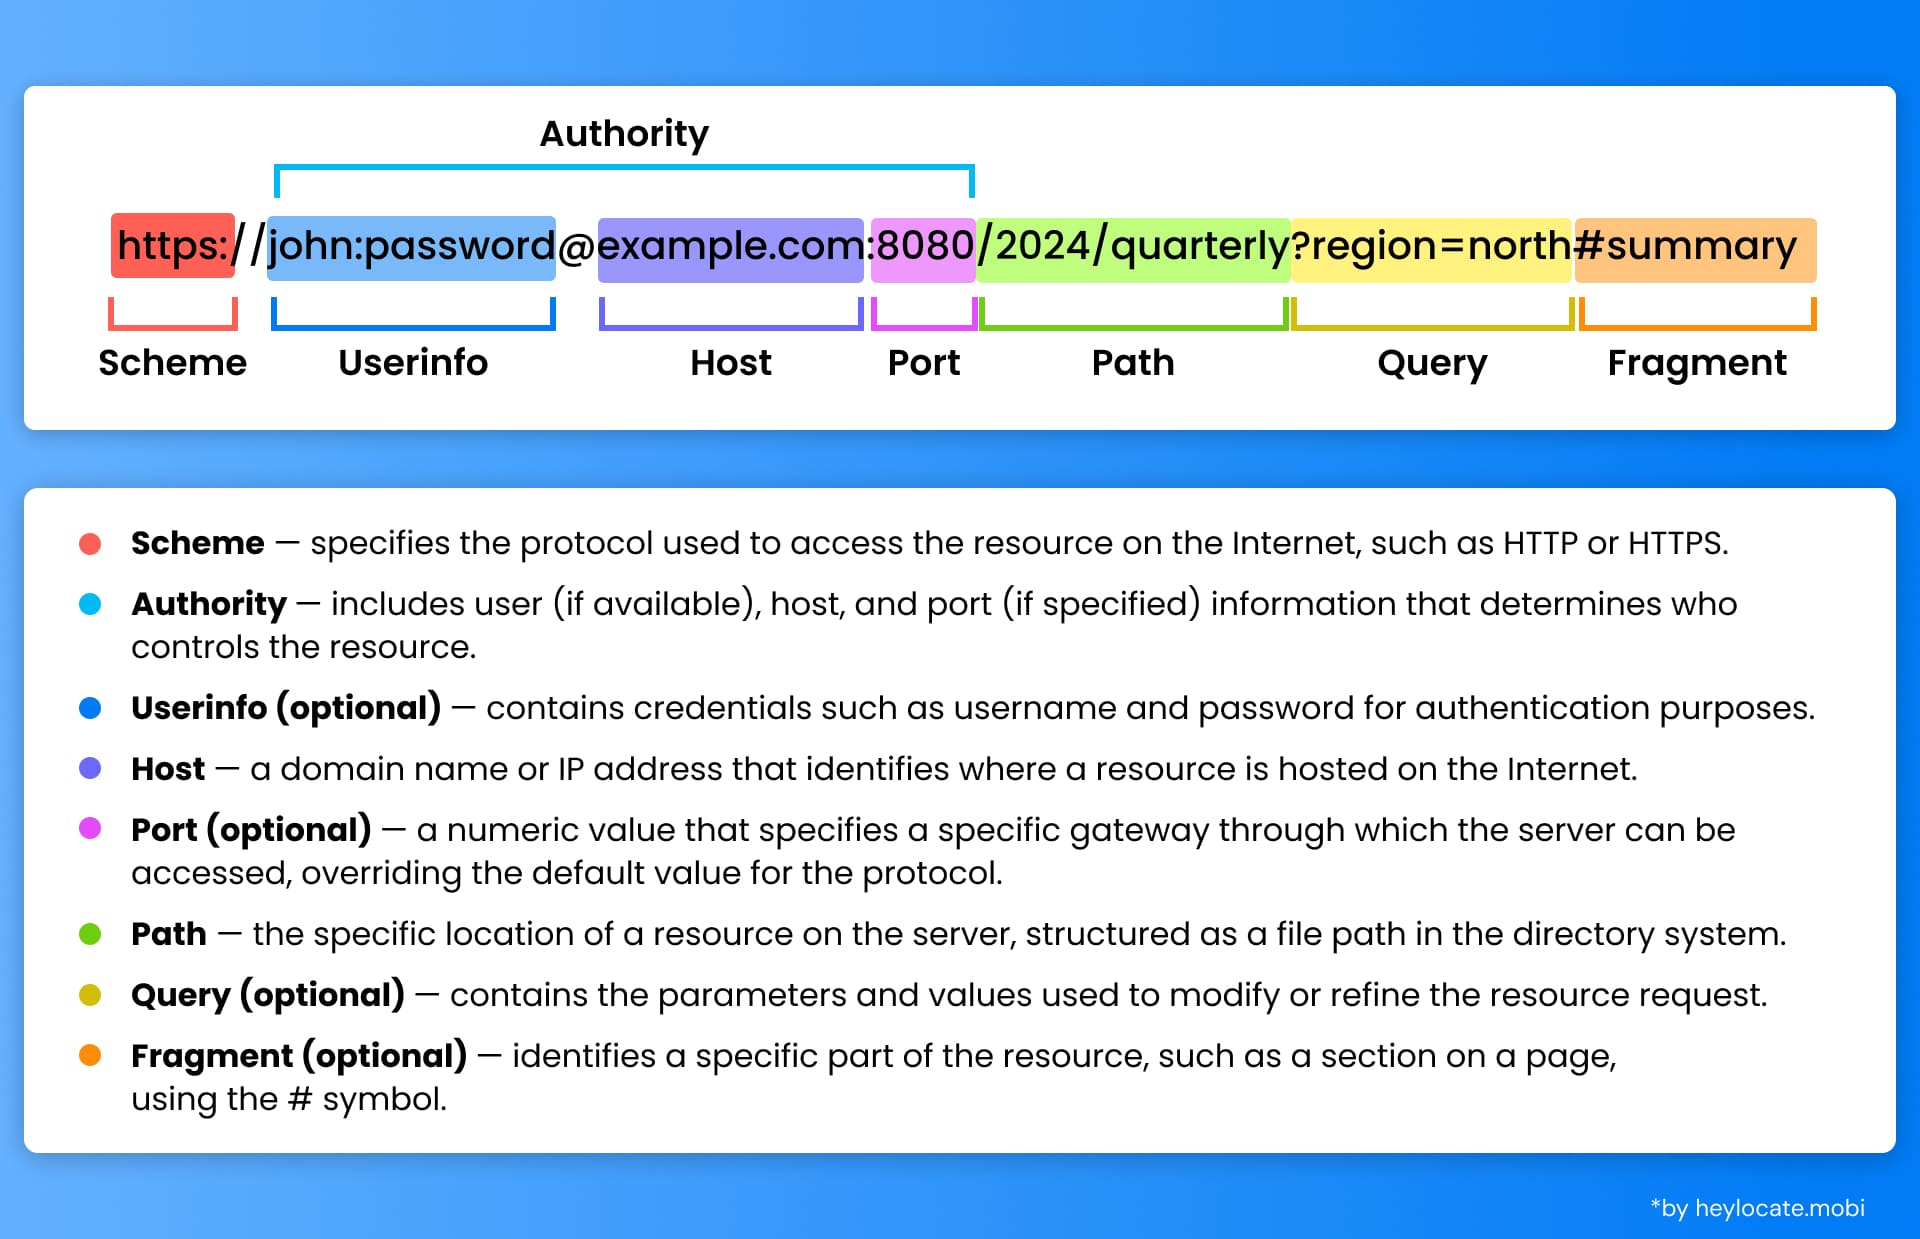 Diagram showing the parts of a URL including scheme, userinfo, host, port, path, query, and fragment, with definitions for each